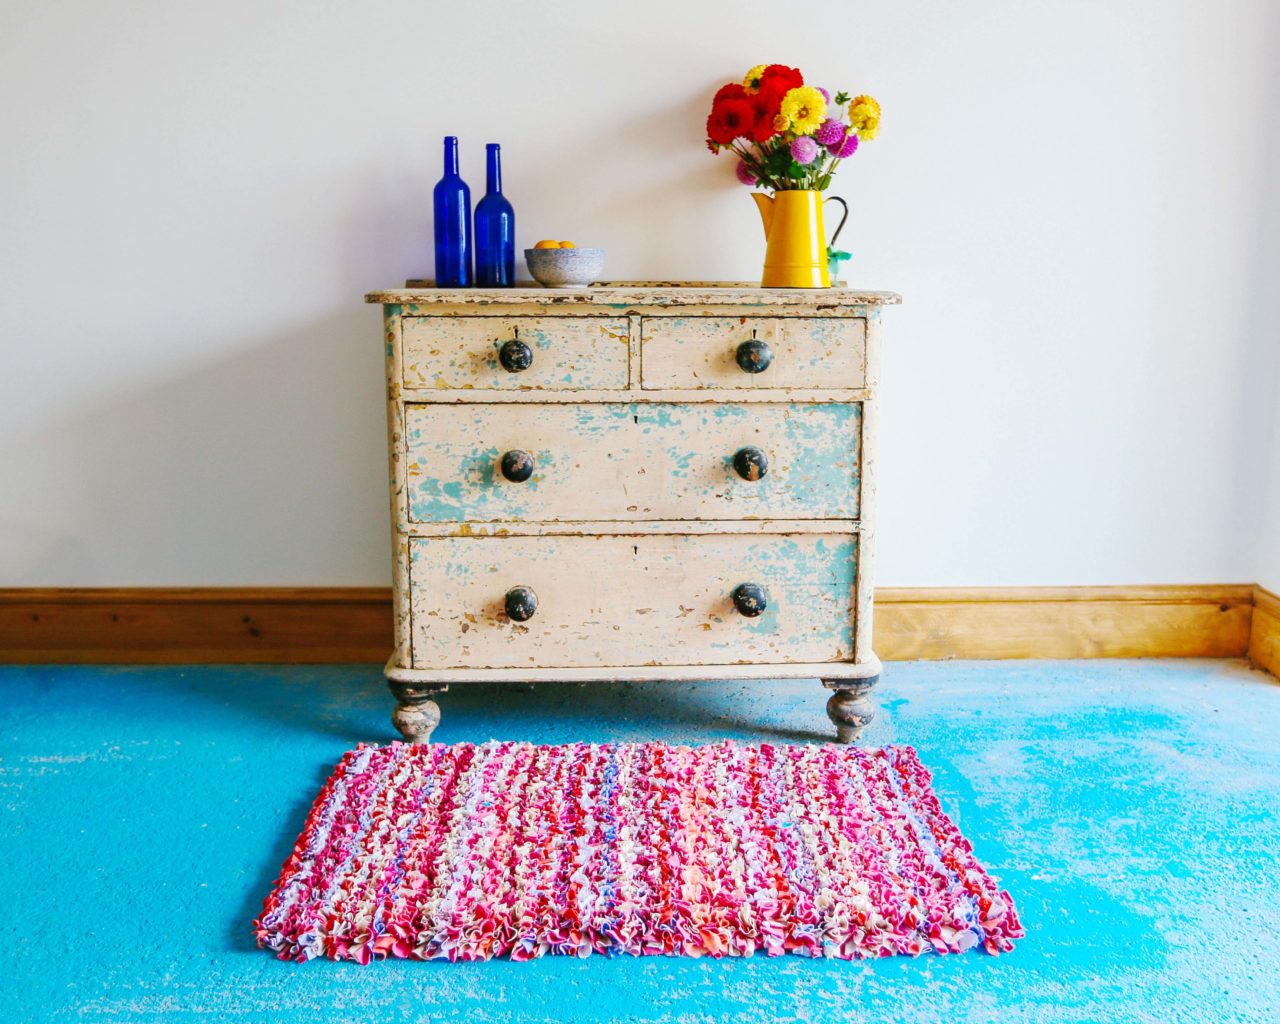 Ragged Life Pink Striped Rag Rug in front of chest of drawers